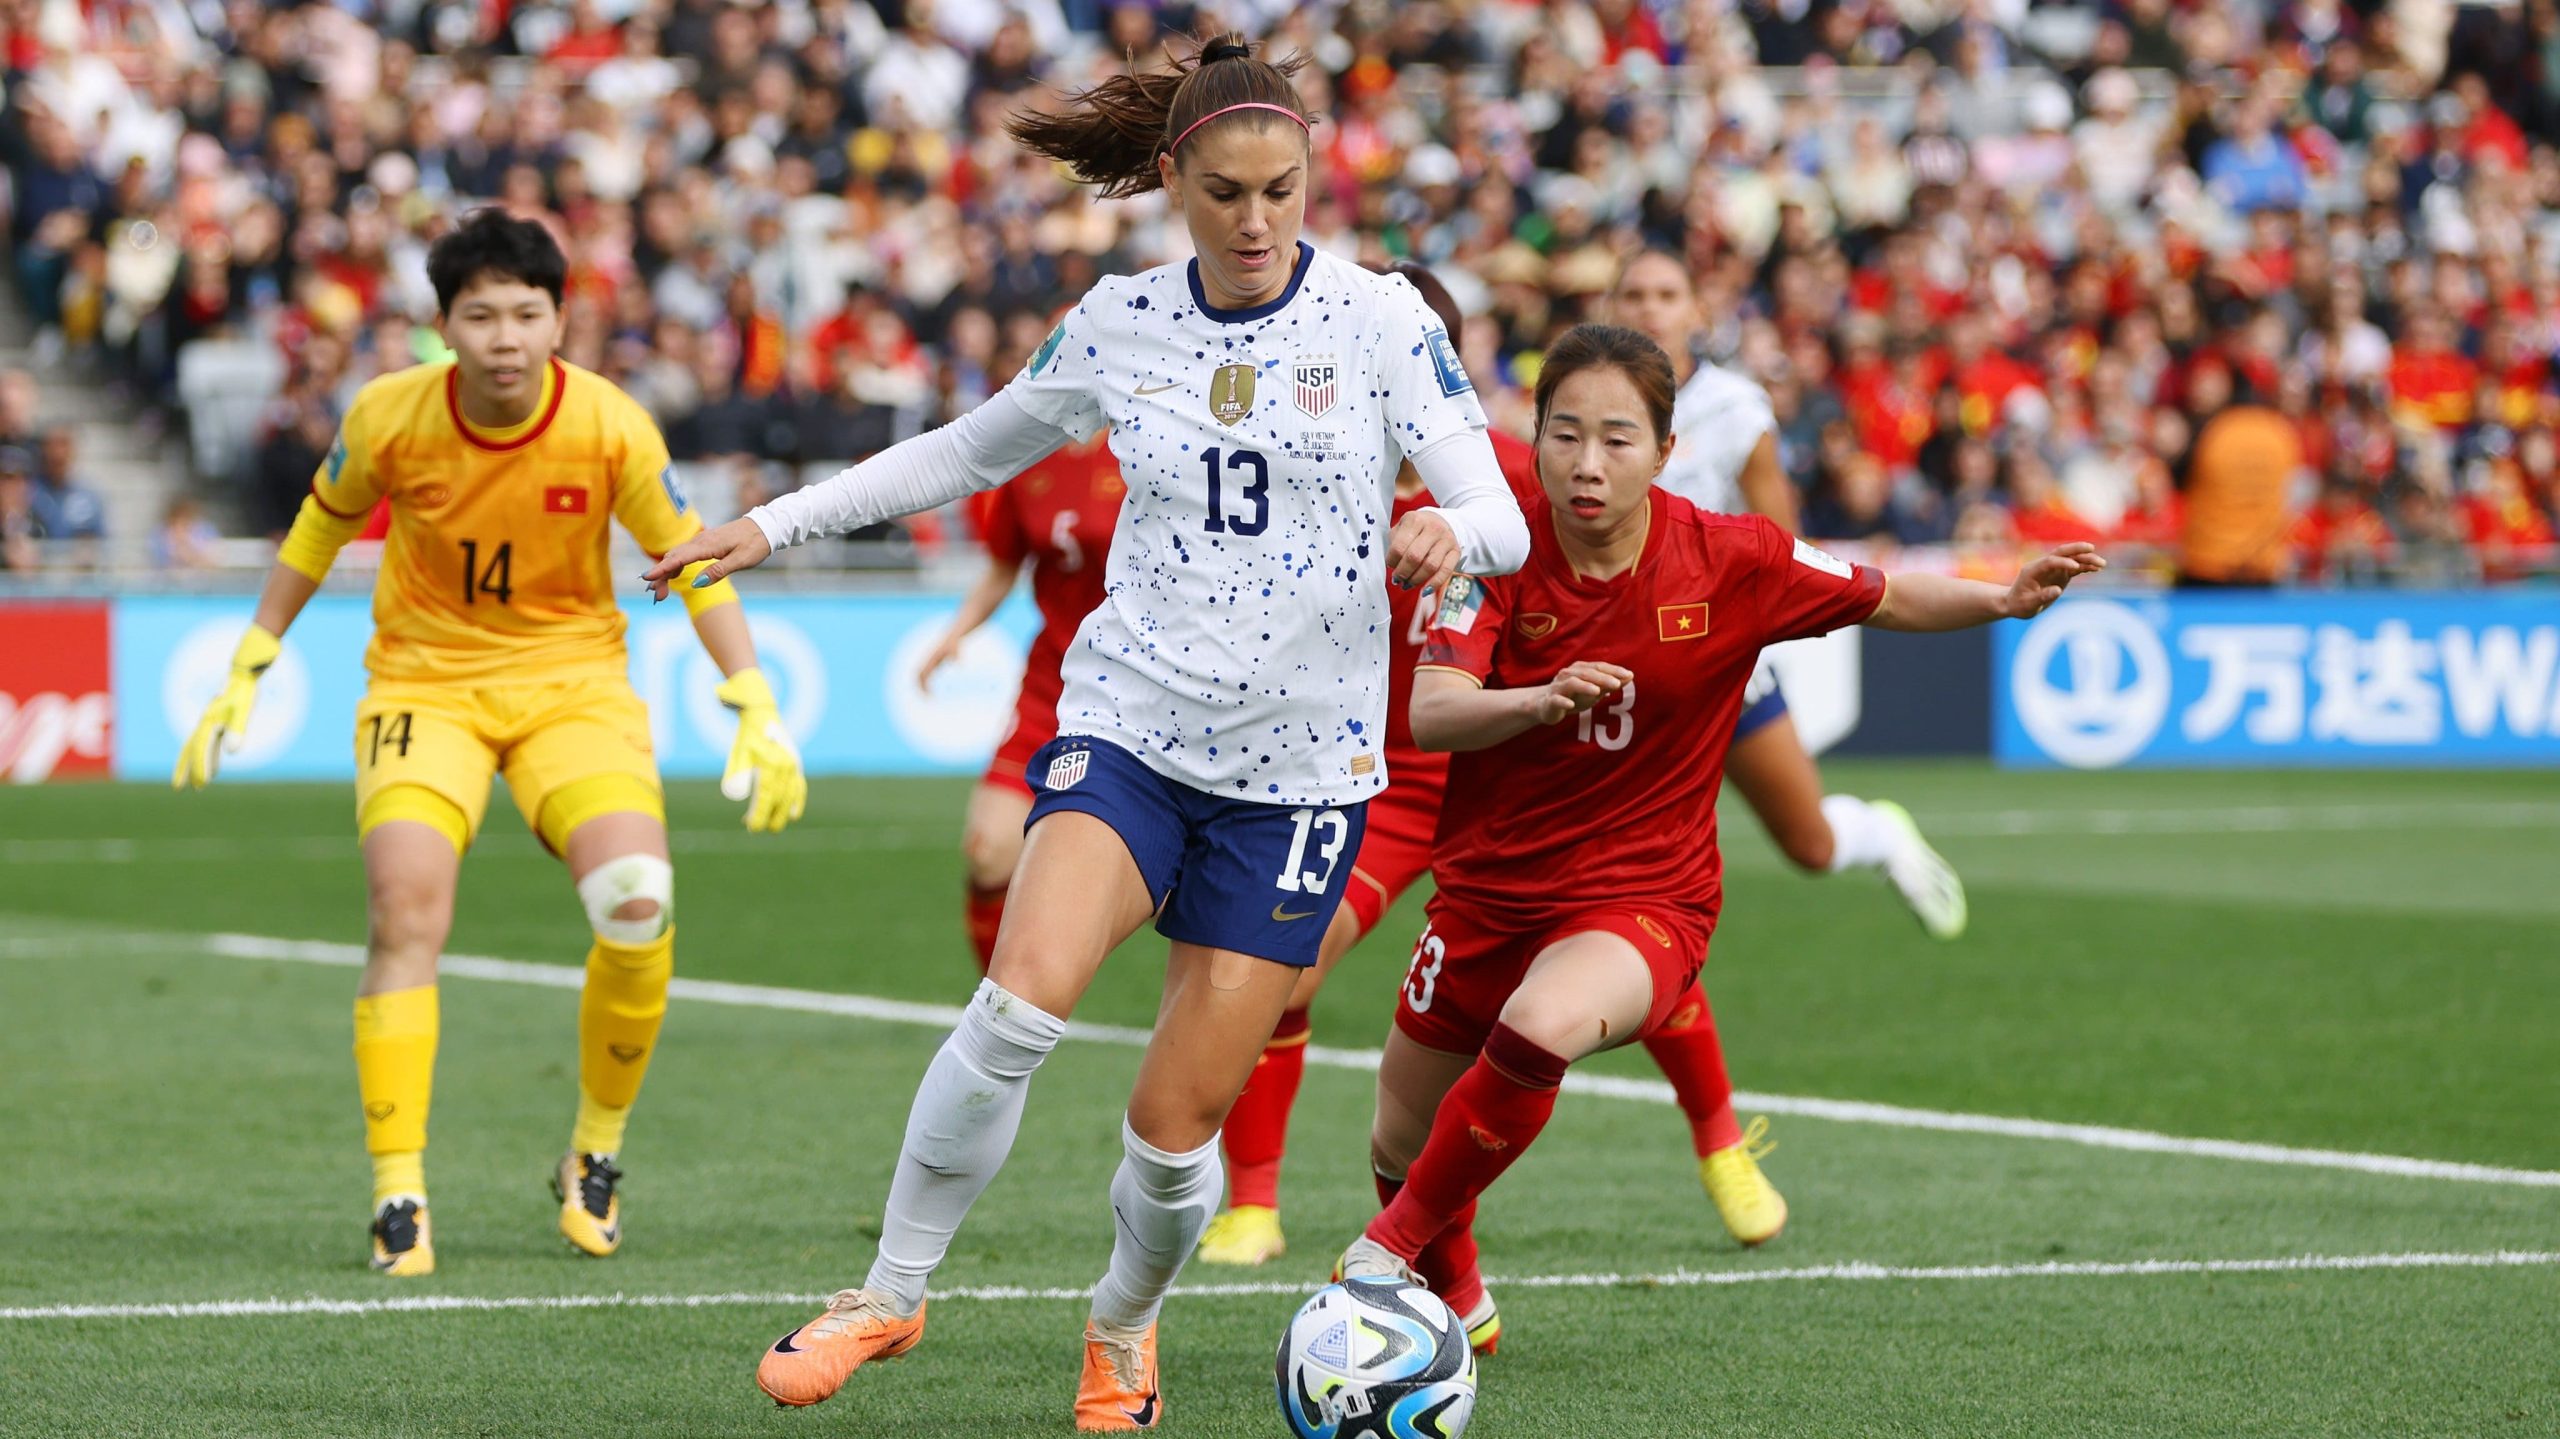 United States kicks off the Women's World Cup against Vietnam